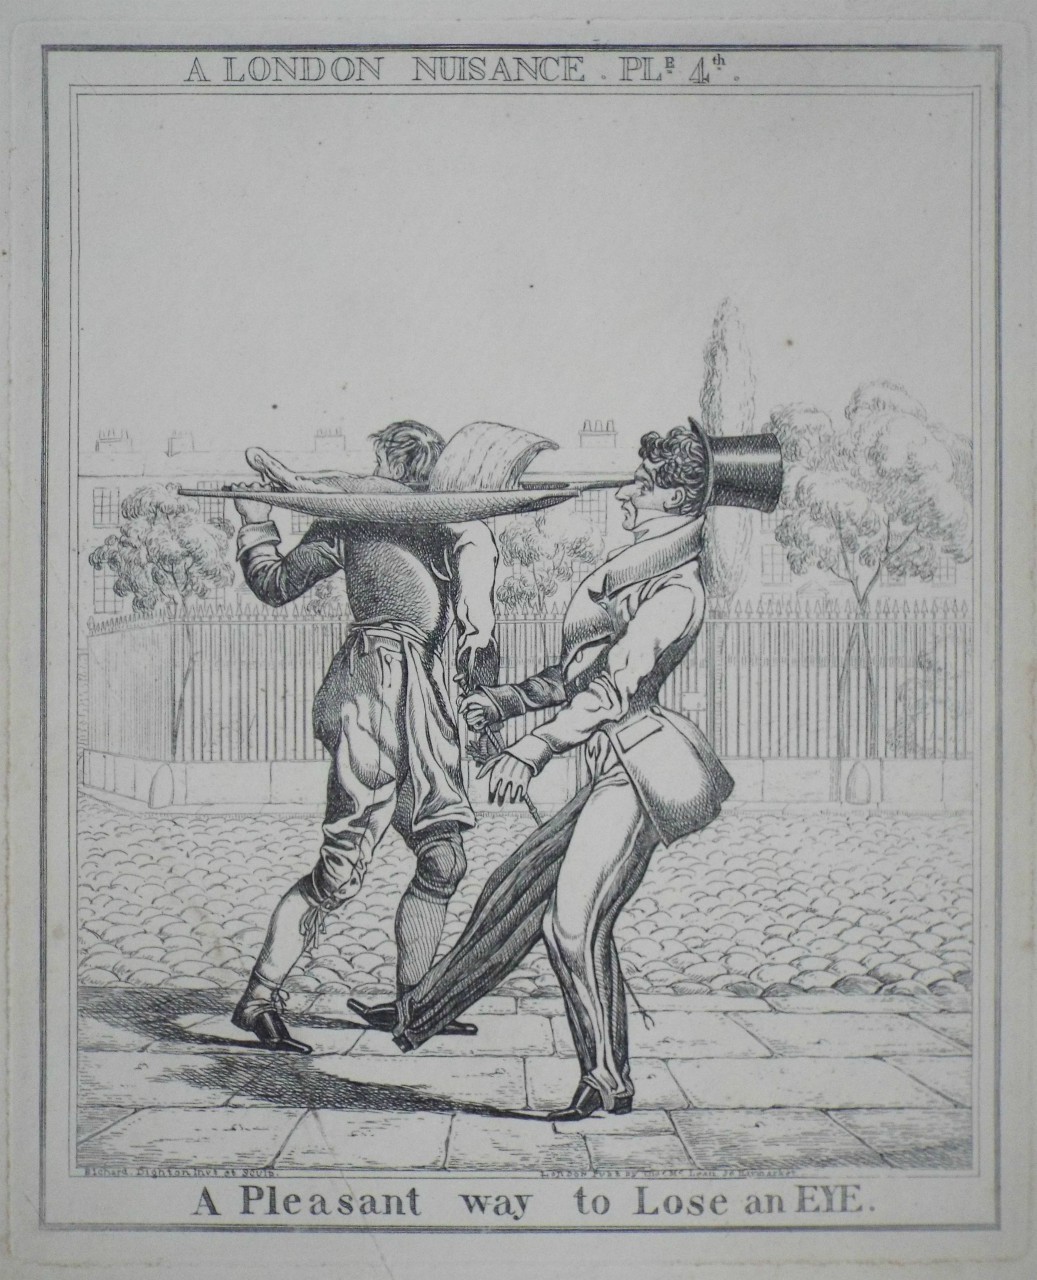 Etching - A London Nuisance. Ple. 4th. A Pleasant way to Lose an Eye. - Dighton